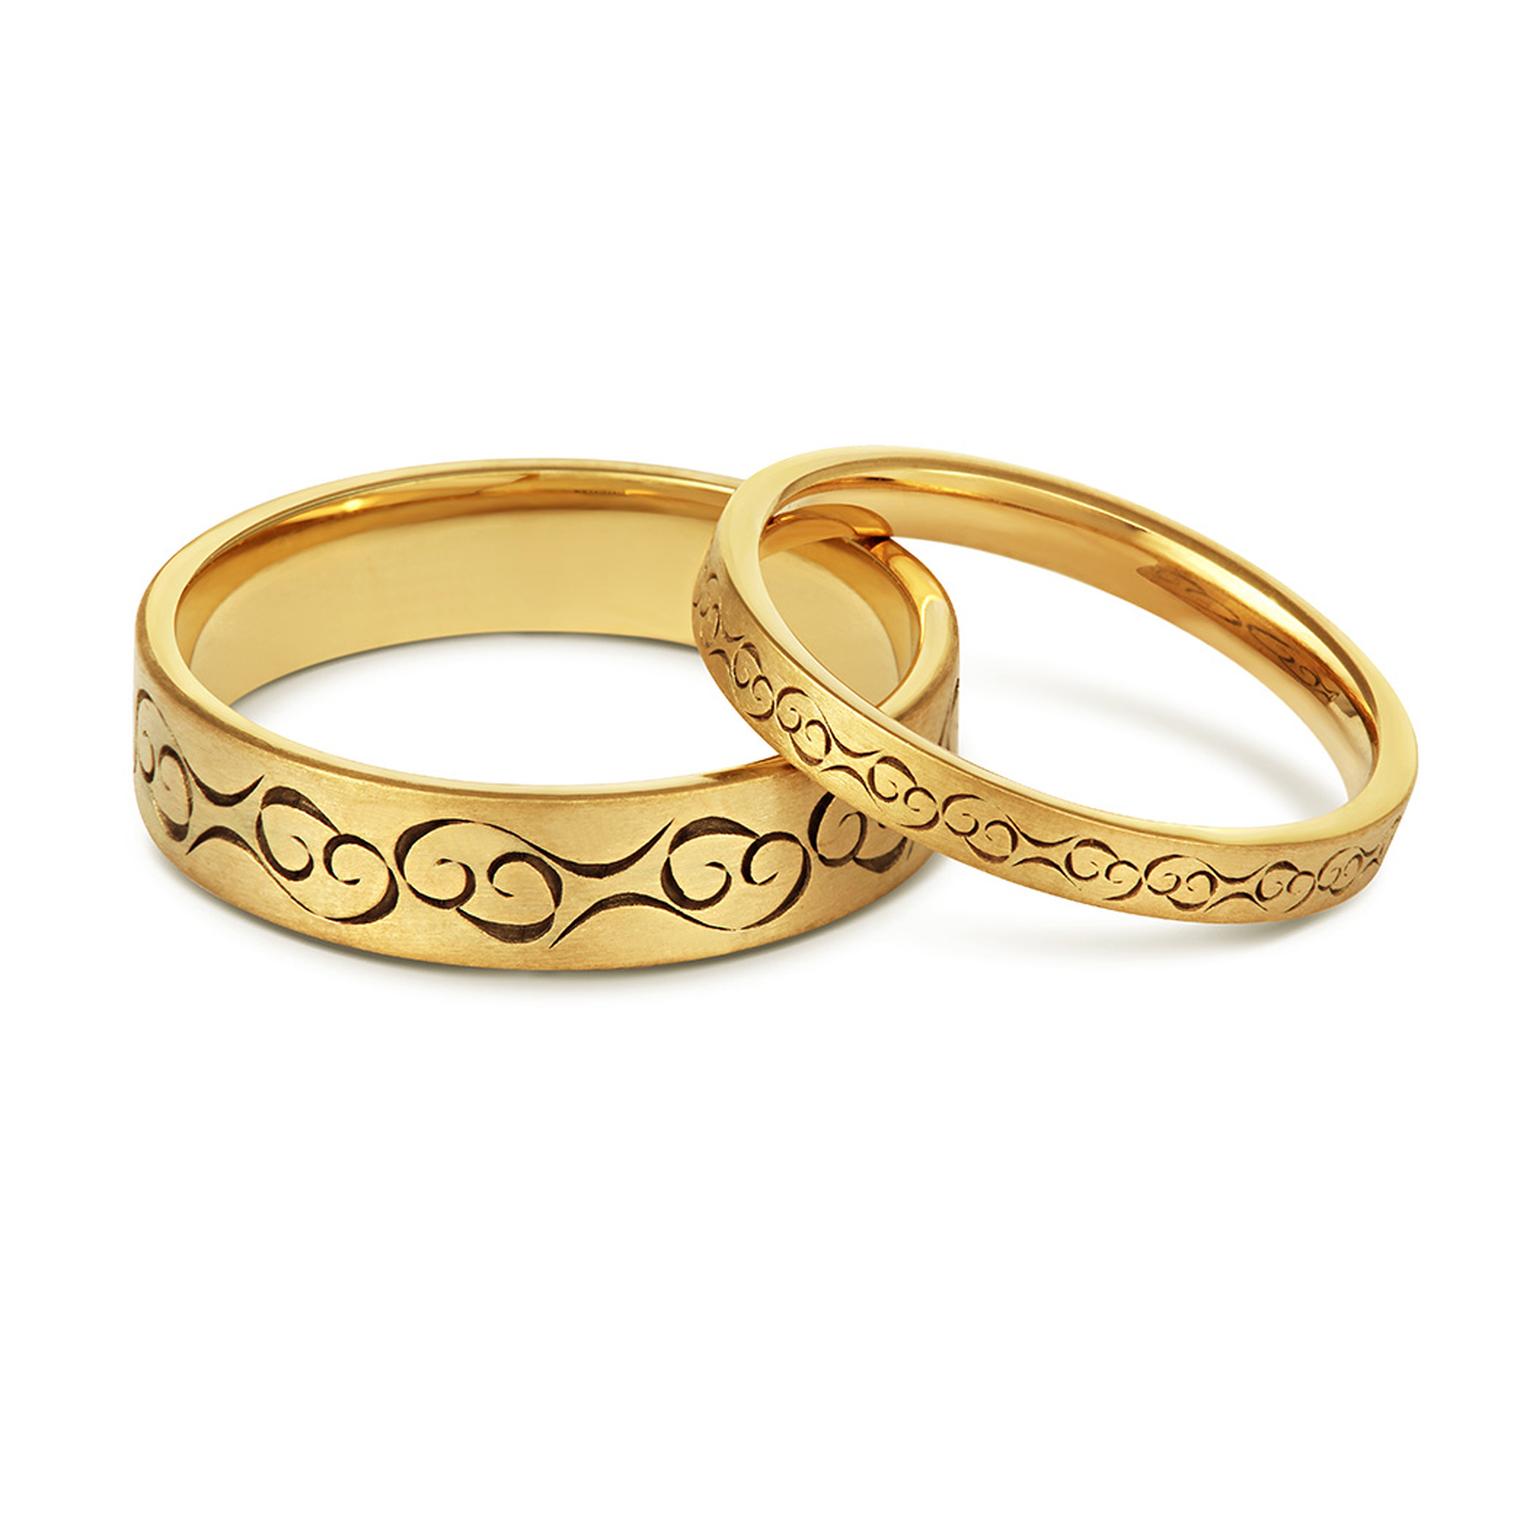 Cred Celtic Love Fairtrade gold wedding rings